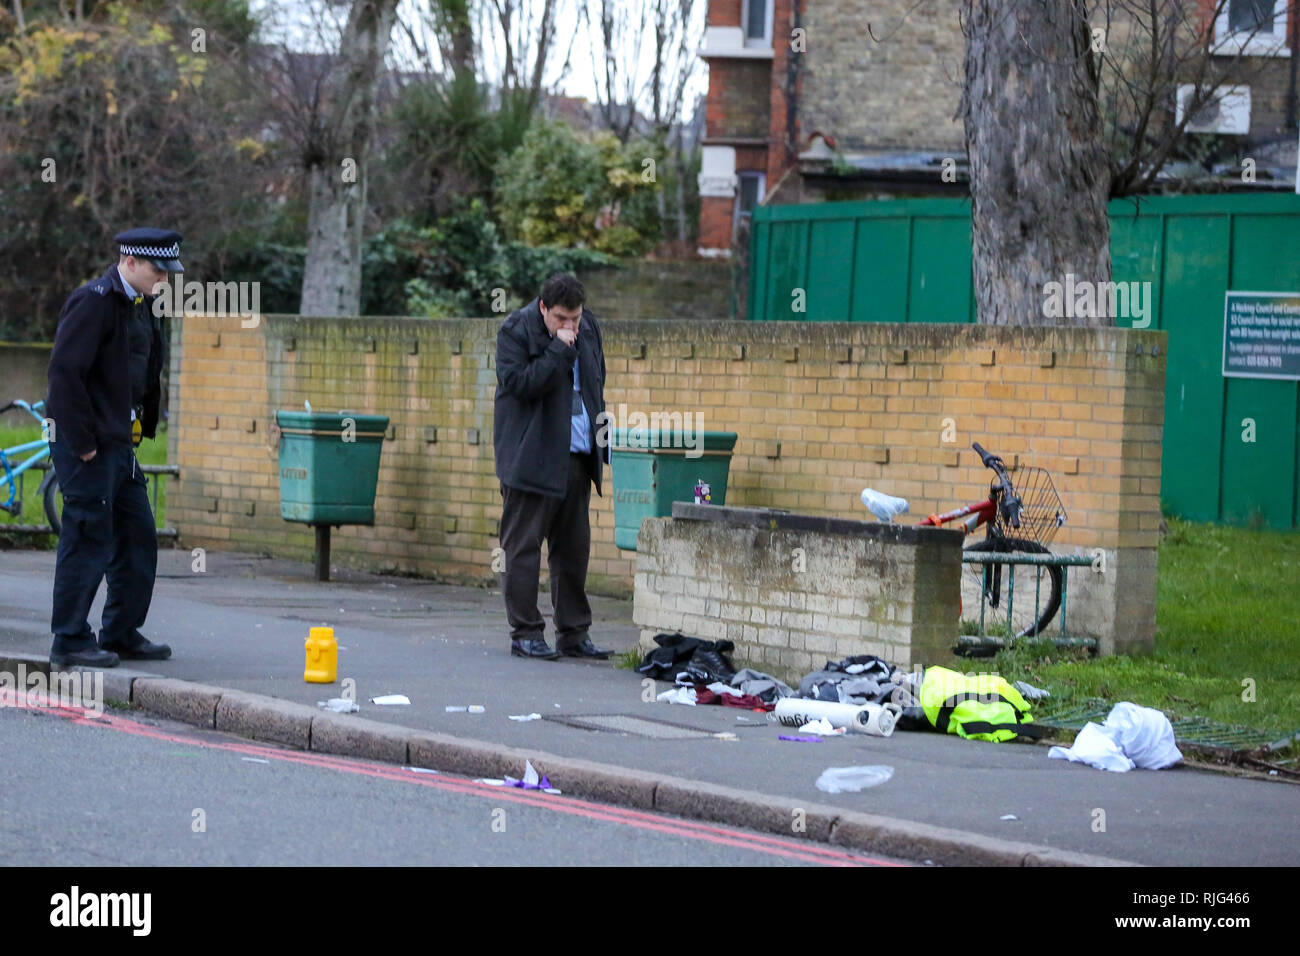 Castlewood Road Hackney East London Uk 6 Feb 19 A Crime Scene At Castlewood Road In Hackney After A Teenager Was Stabbed On A Bus And Airlifted To Hospital The Met